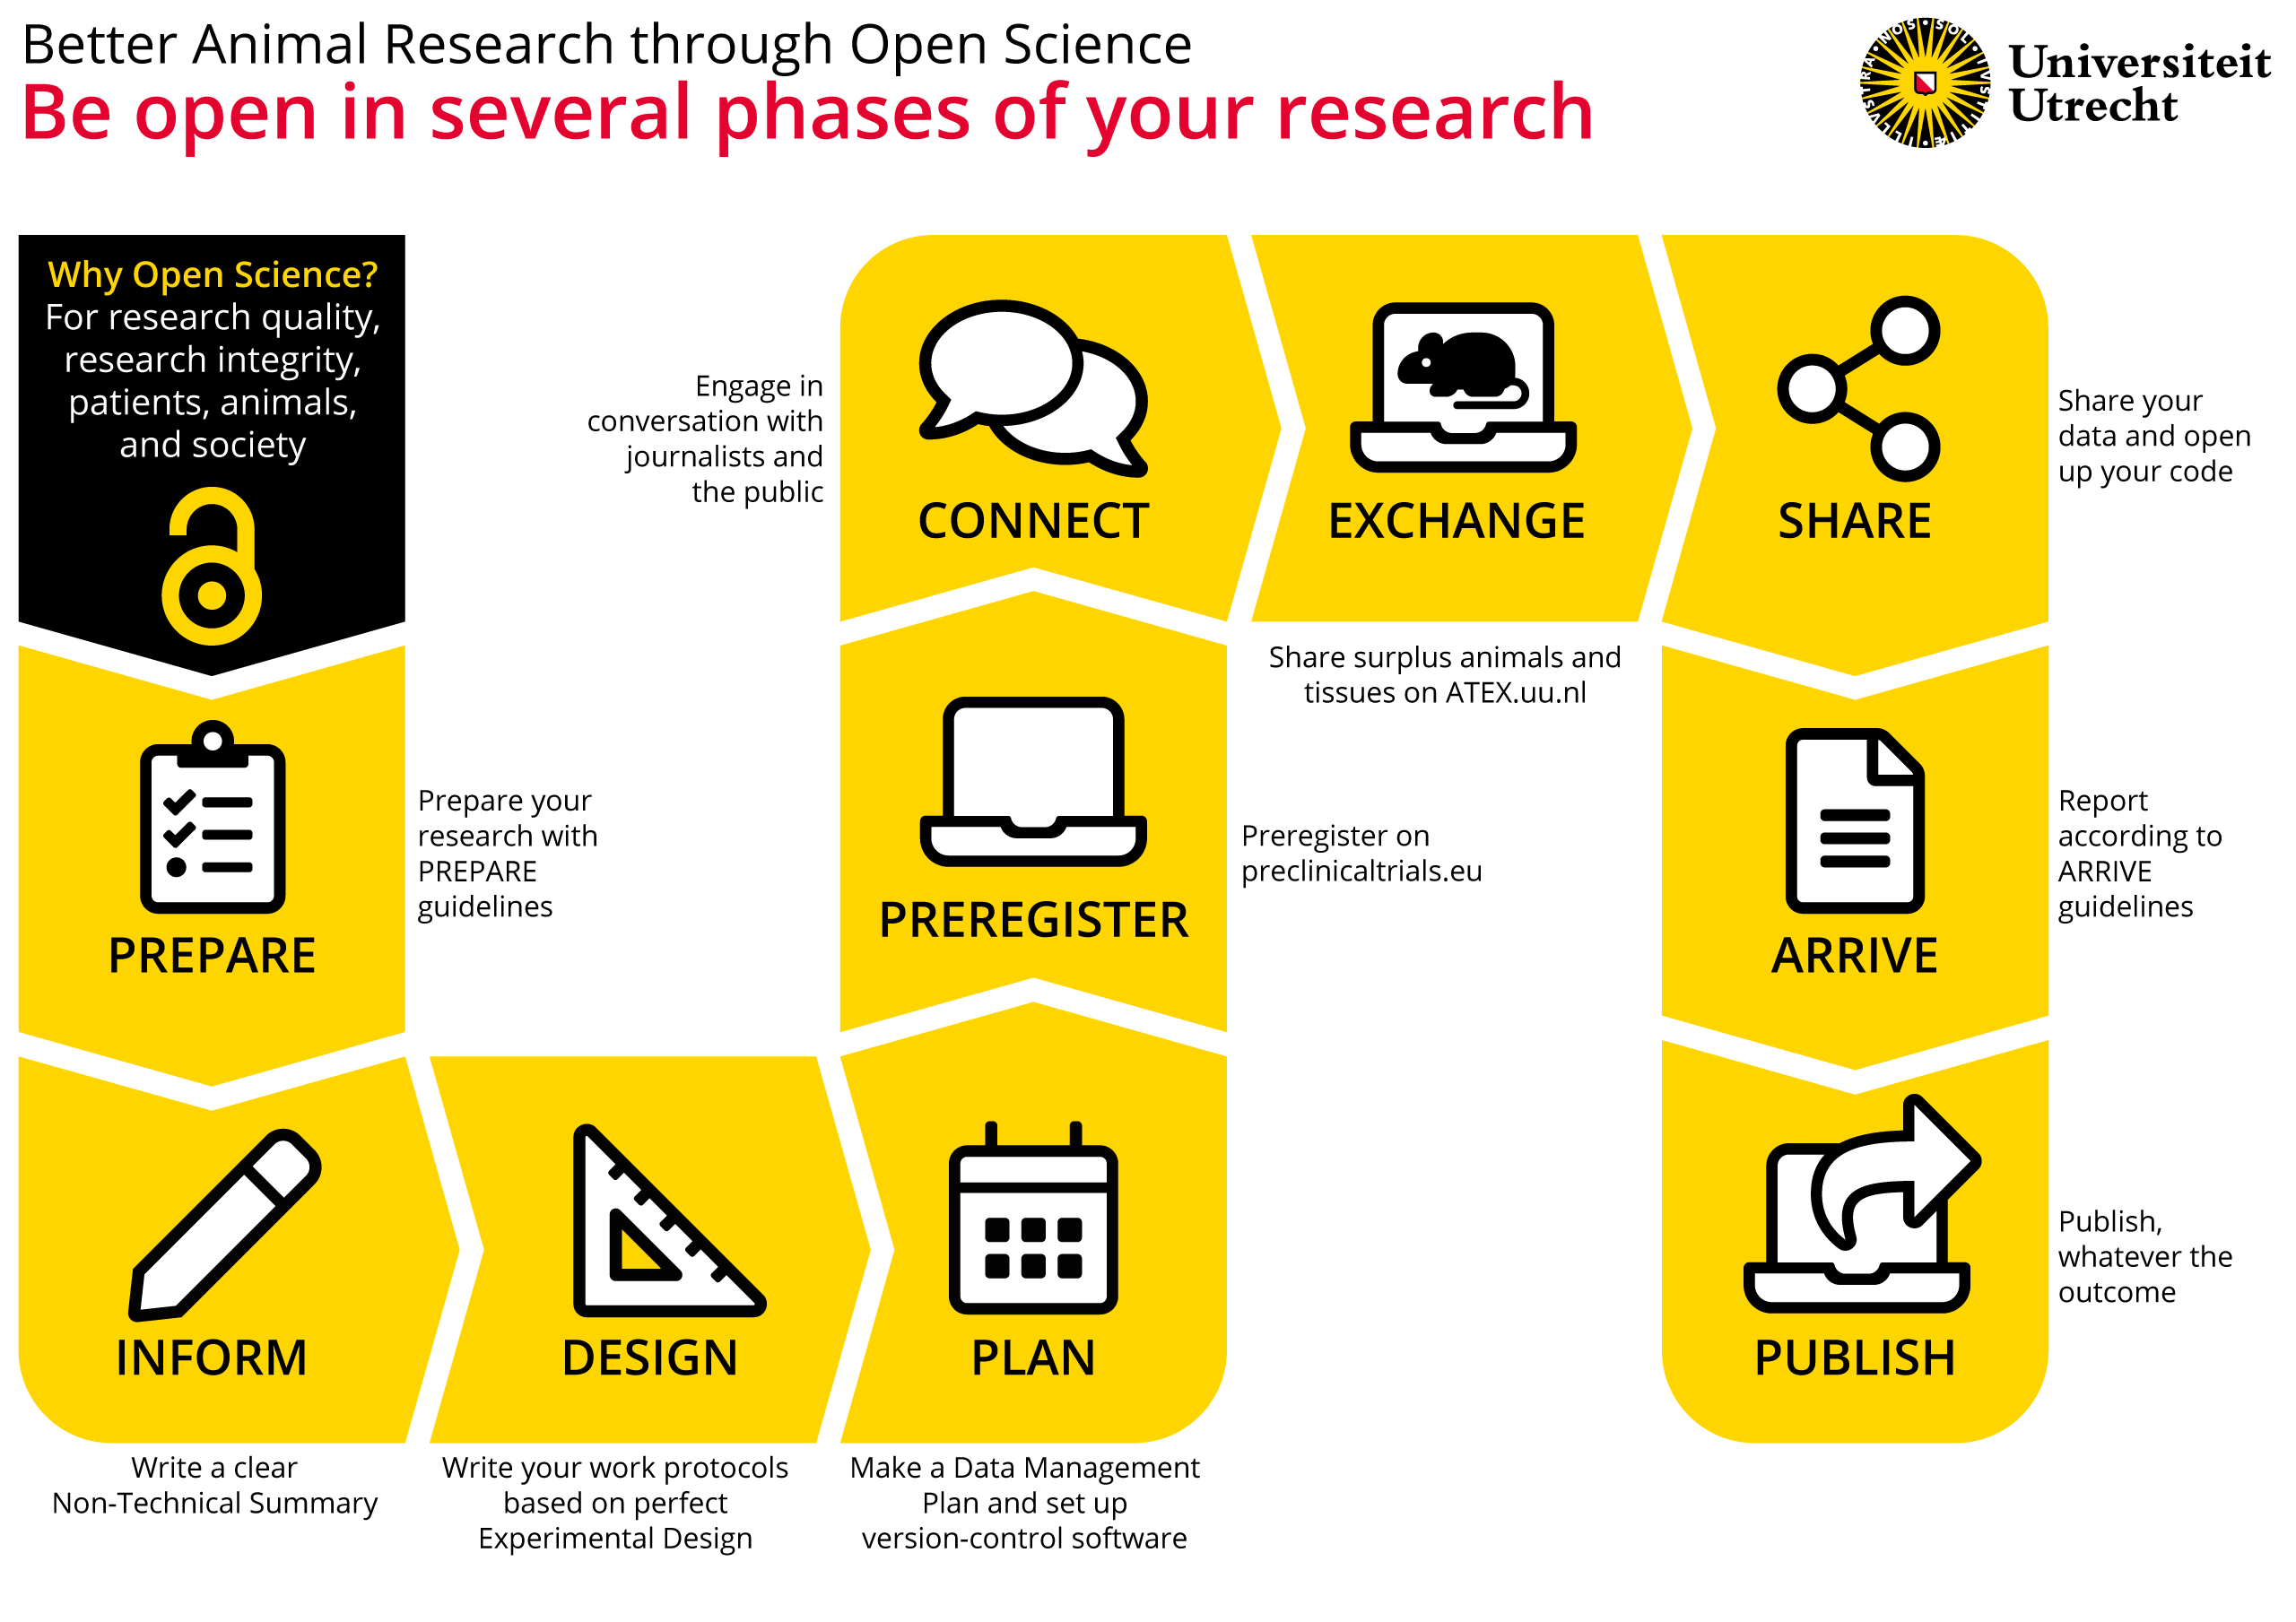 Be open in several phases of your research